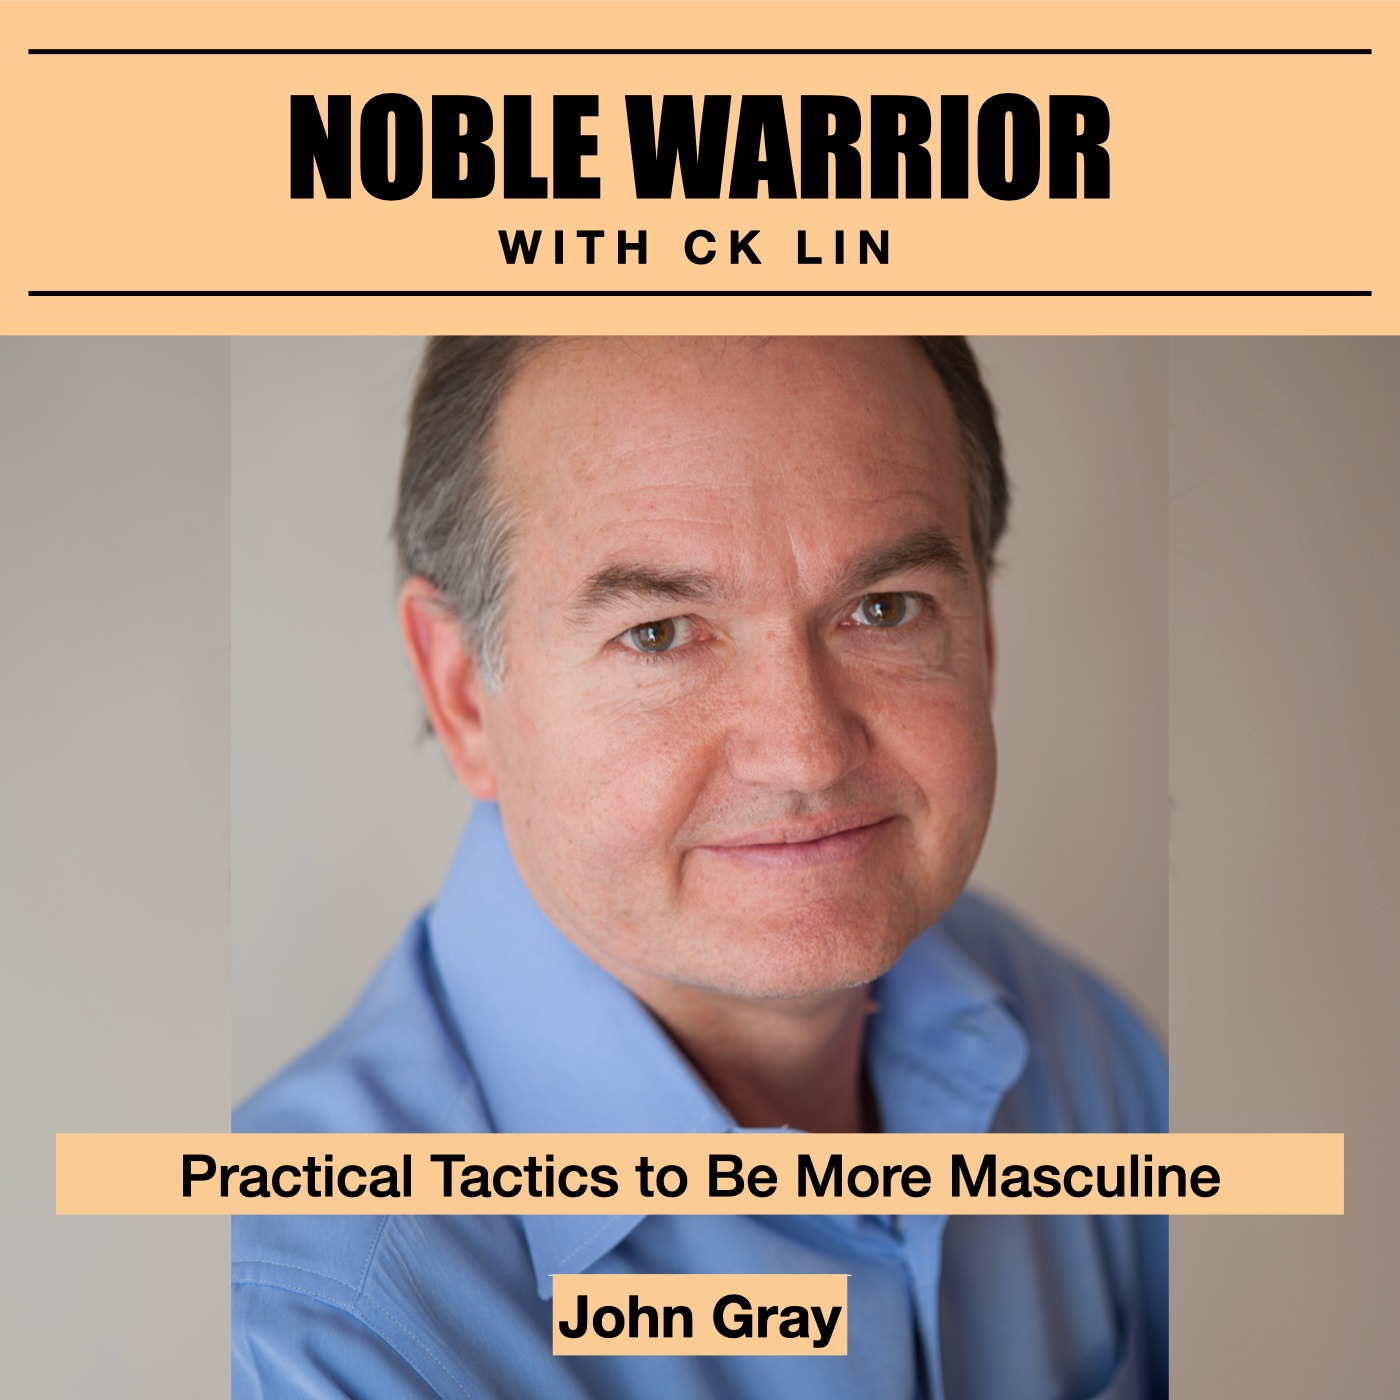 137 John Gray: Practical Tactics to Be More Masculine Image